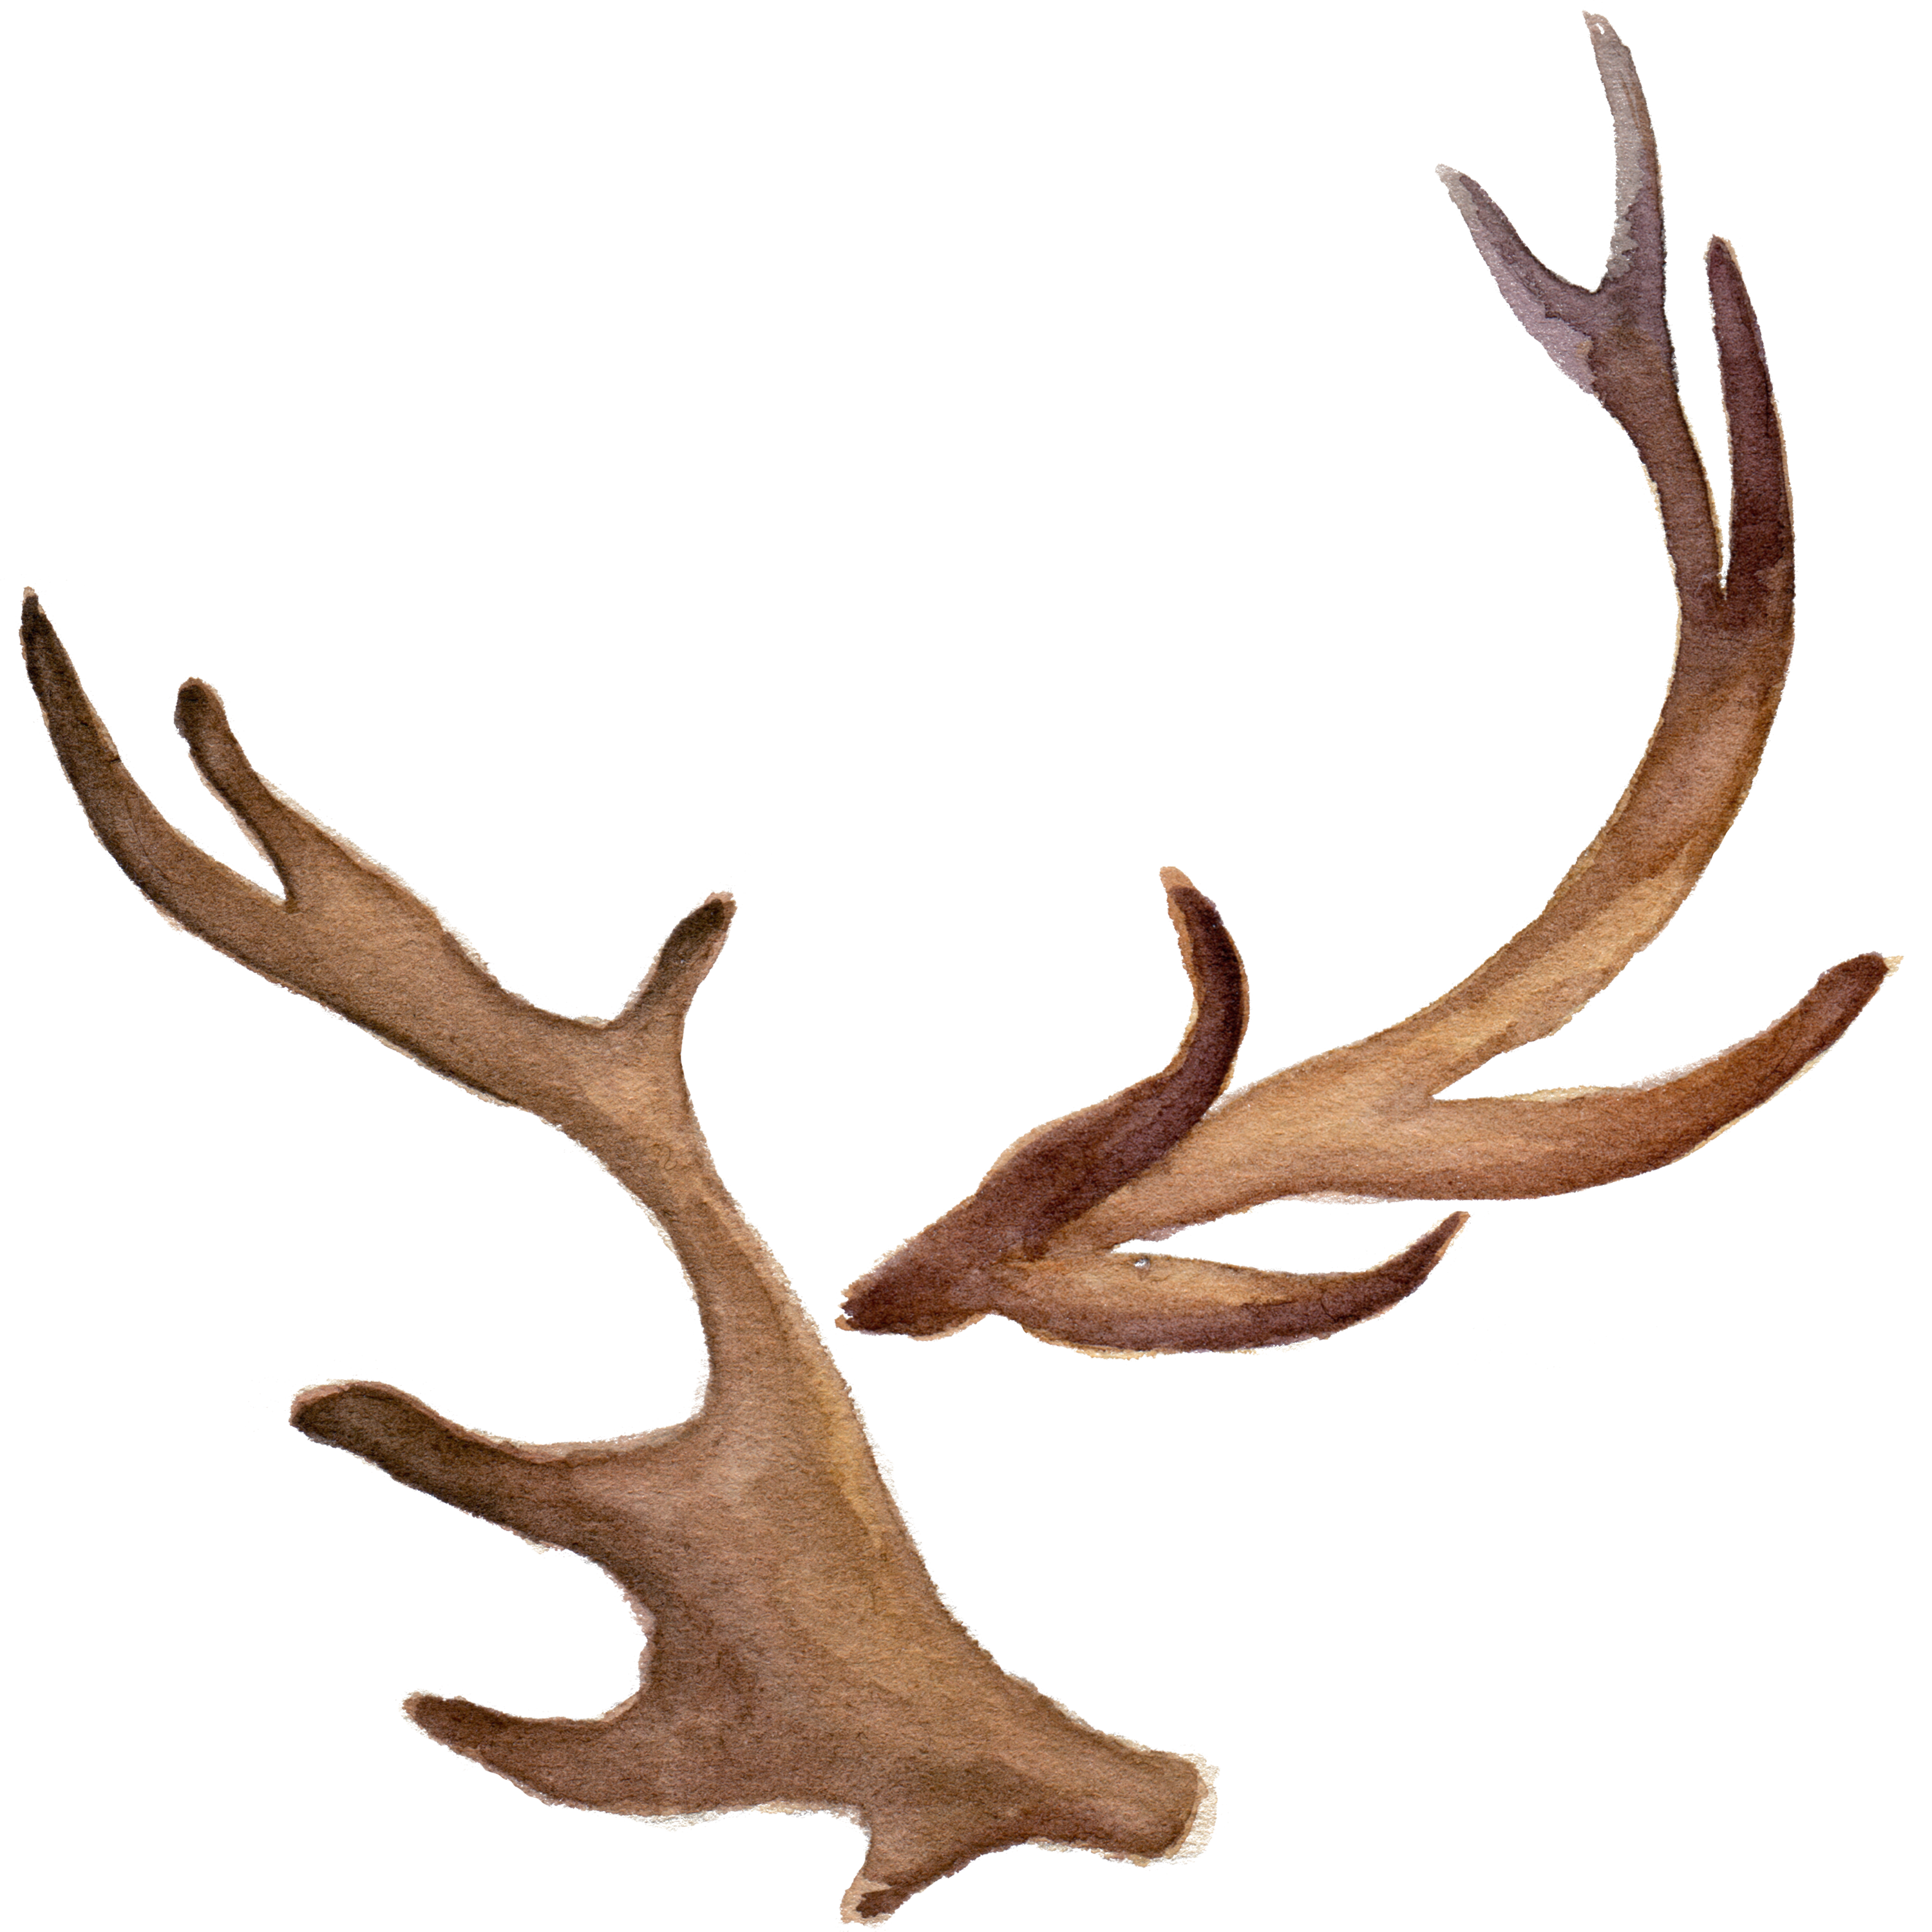 List 102+ Pictures Pictures Of Deer With Antlers Superb